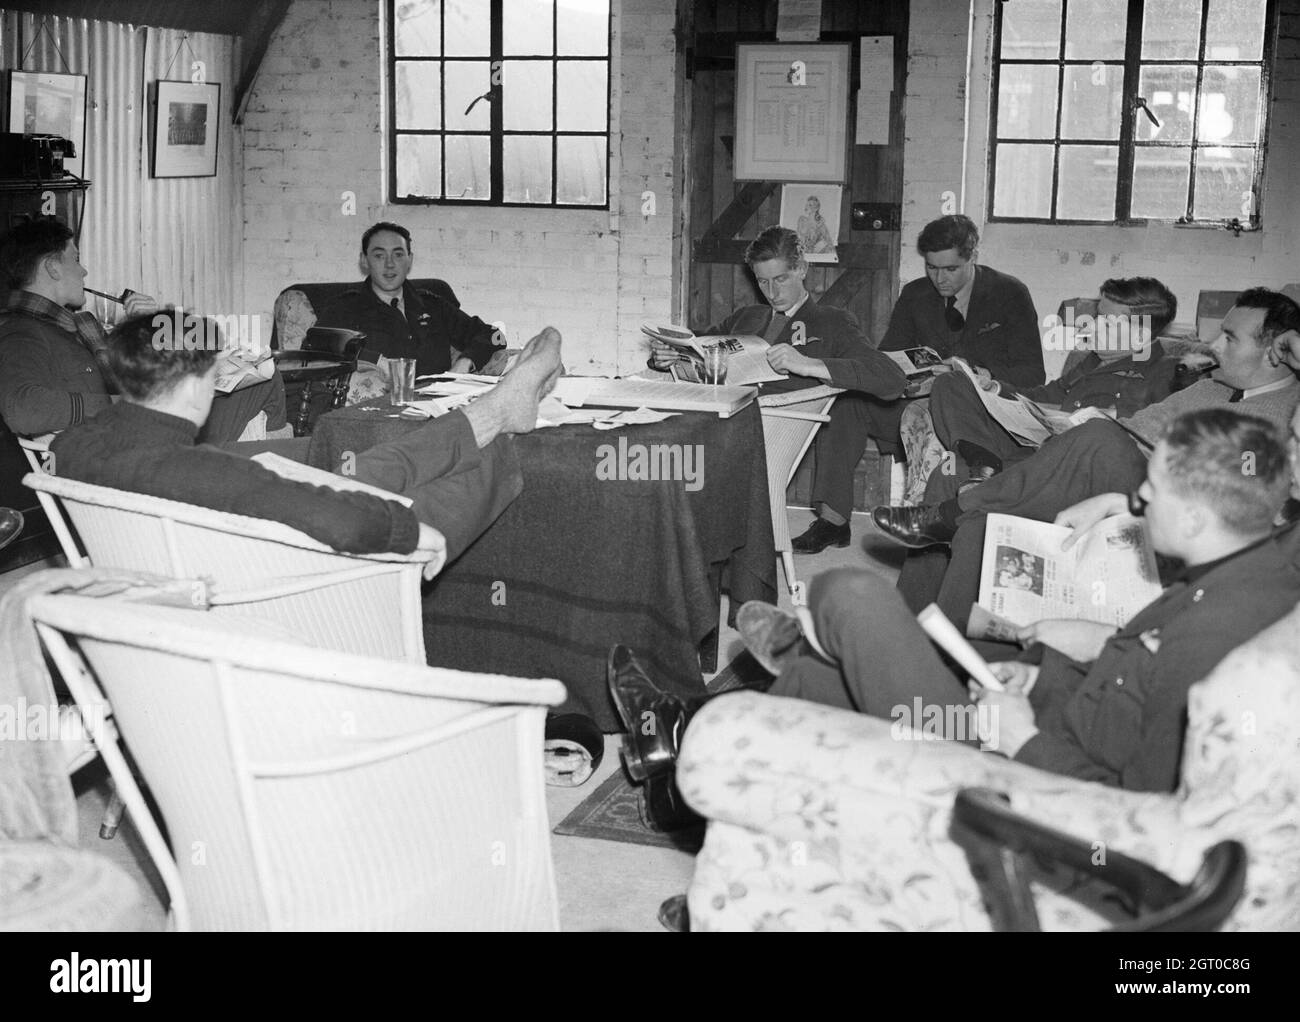 Squadron Leader B J E 'Sandy' Lane, the Commanding Officer of No. 19 Squadron RAF (facing camera), relaxes with some of his pilots in the Squadron crew room at Manor Farm, Fowlmere, Cambridgeshire,September 1940. Stock Photo